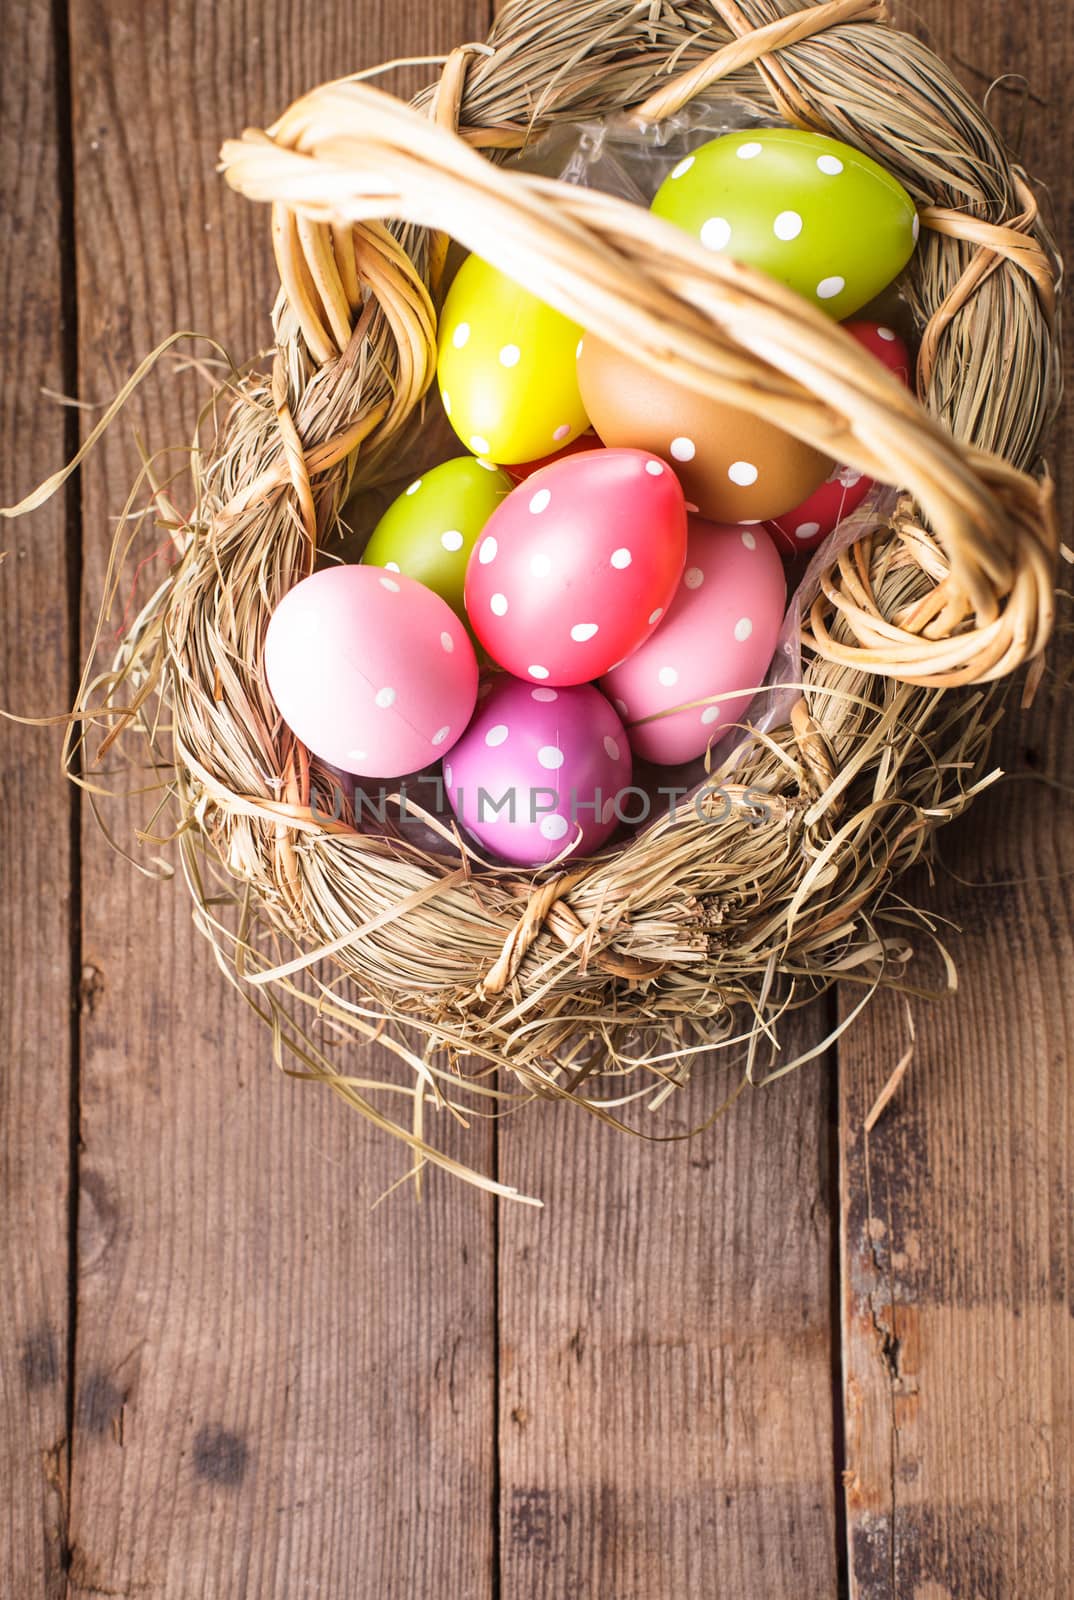 Colorful polka dot eggs in basket with copy space, Easter decorations